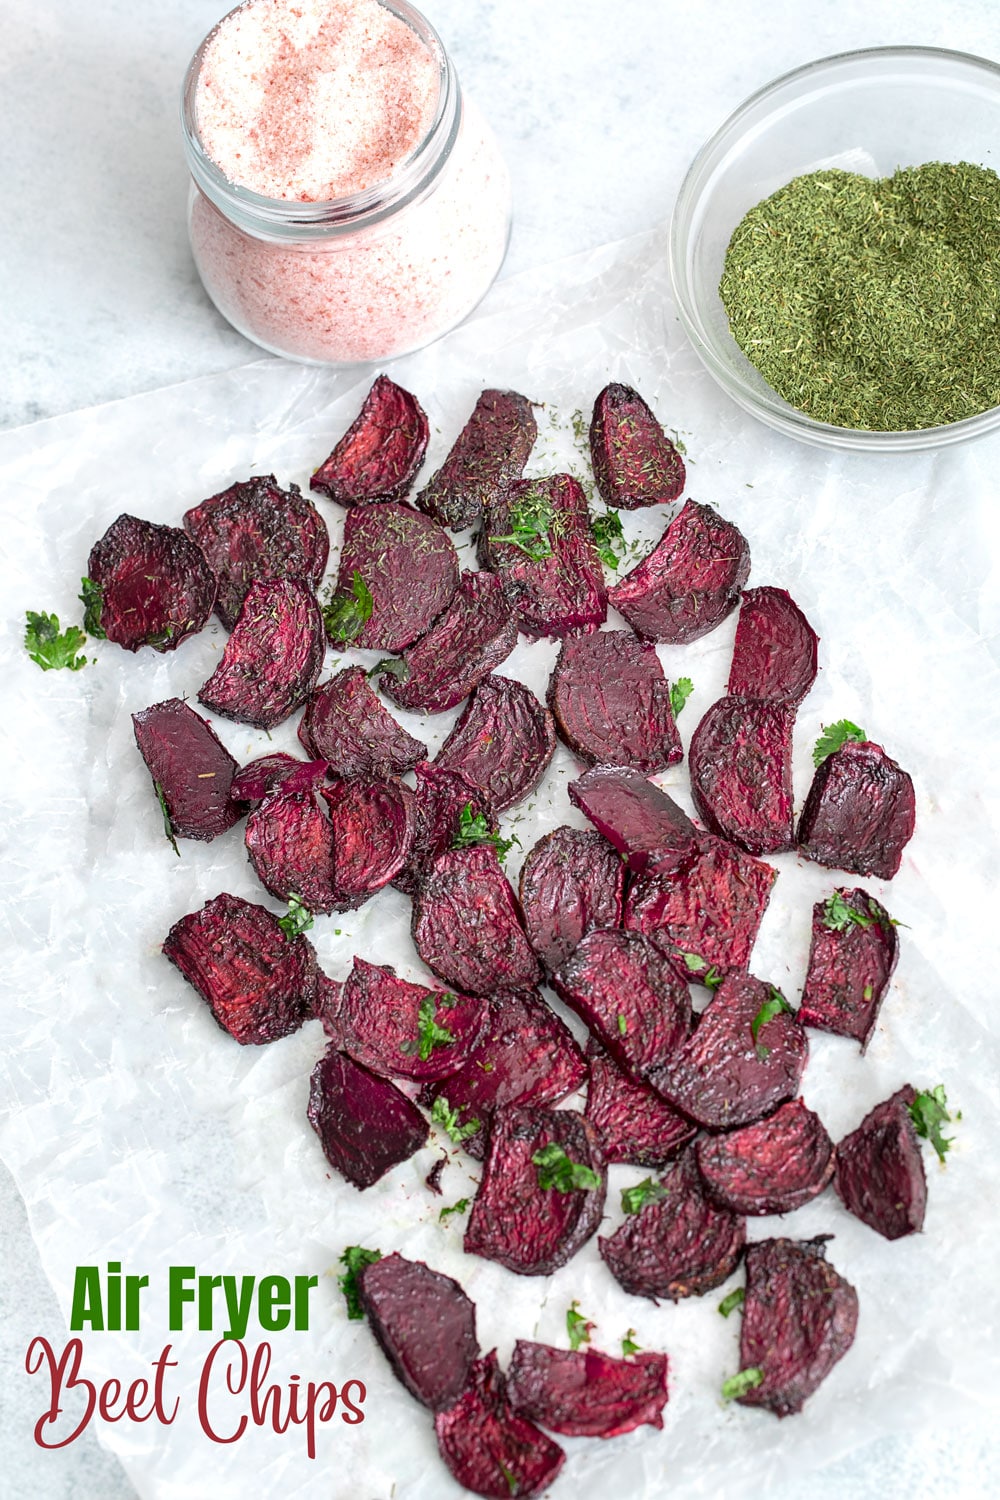 Top view of beet chips with salt bottle and dill seasoning in a bowl